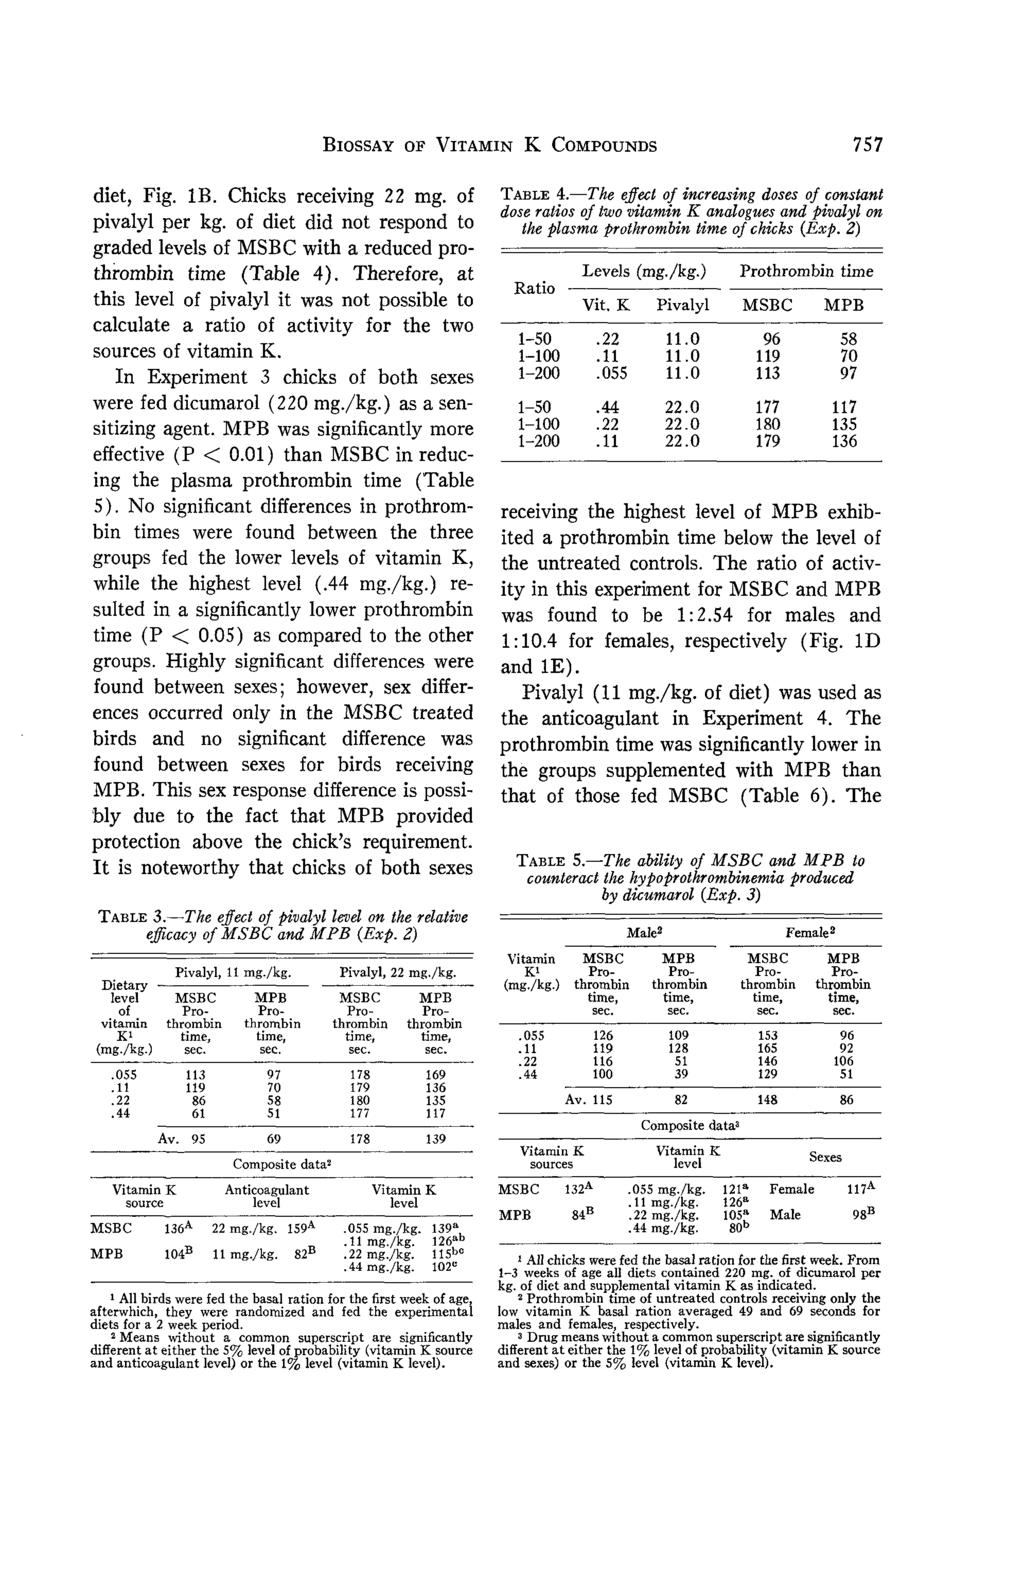 BIOSSAY OF VITAMIN K COMPOUNDS 757 diet, Fig. IB. Chicks receiving 22 mg. of pivalyl per kg. of diet did not respond to graded levels of with a reduced prothrombin time (Table 4).